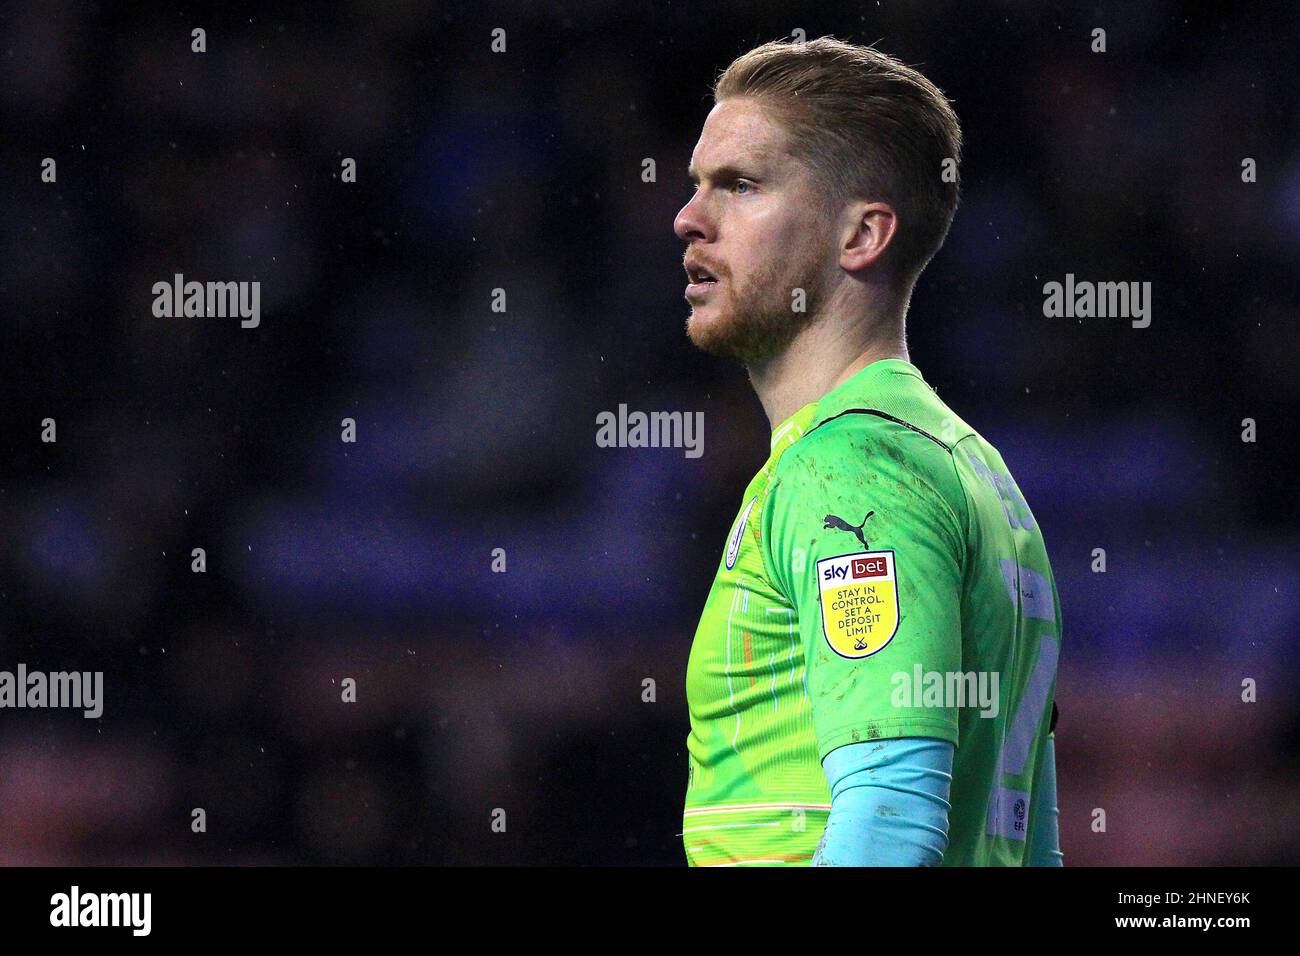 Wigan, UK. 15th Feb, 2022. Ben Amos of Wigan Athletic during the Sky Bet League One match between Wigan Athletic and Crewe Alexandra at DW Stadium on February 15th 2022 in Wigan, England. (Photo by Tony Taylor/phcimages.com) Credit: PHC Images/Alamy Live News Stock Photo